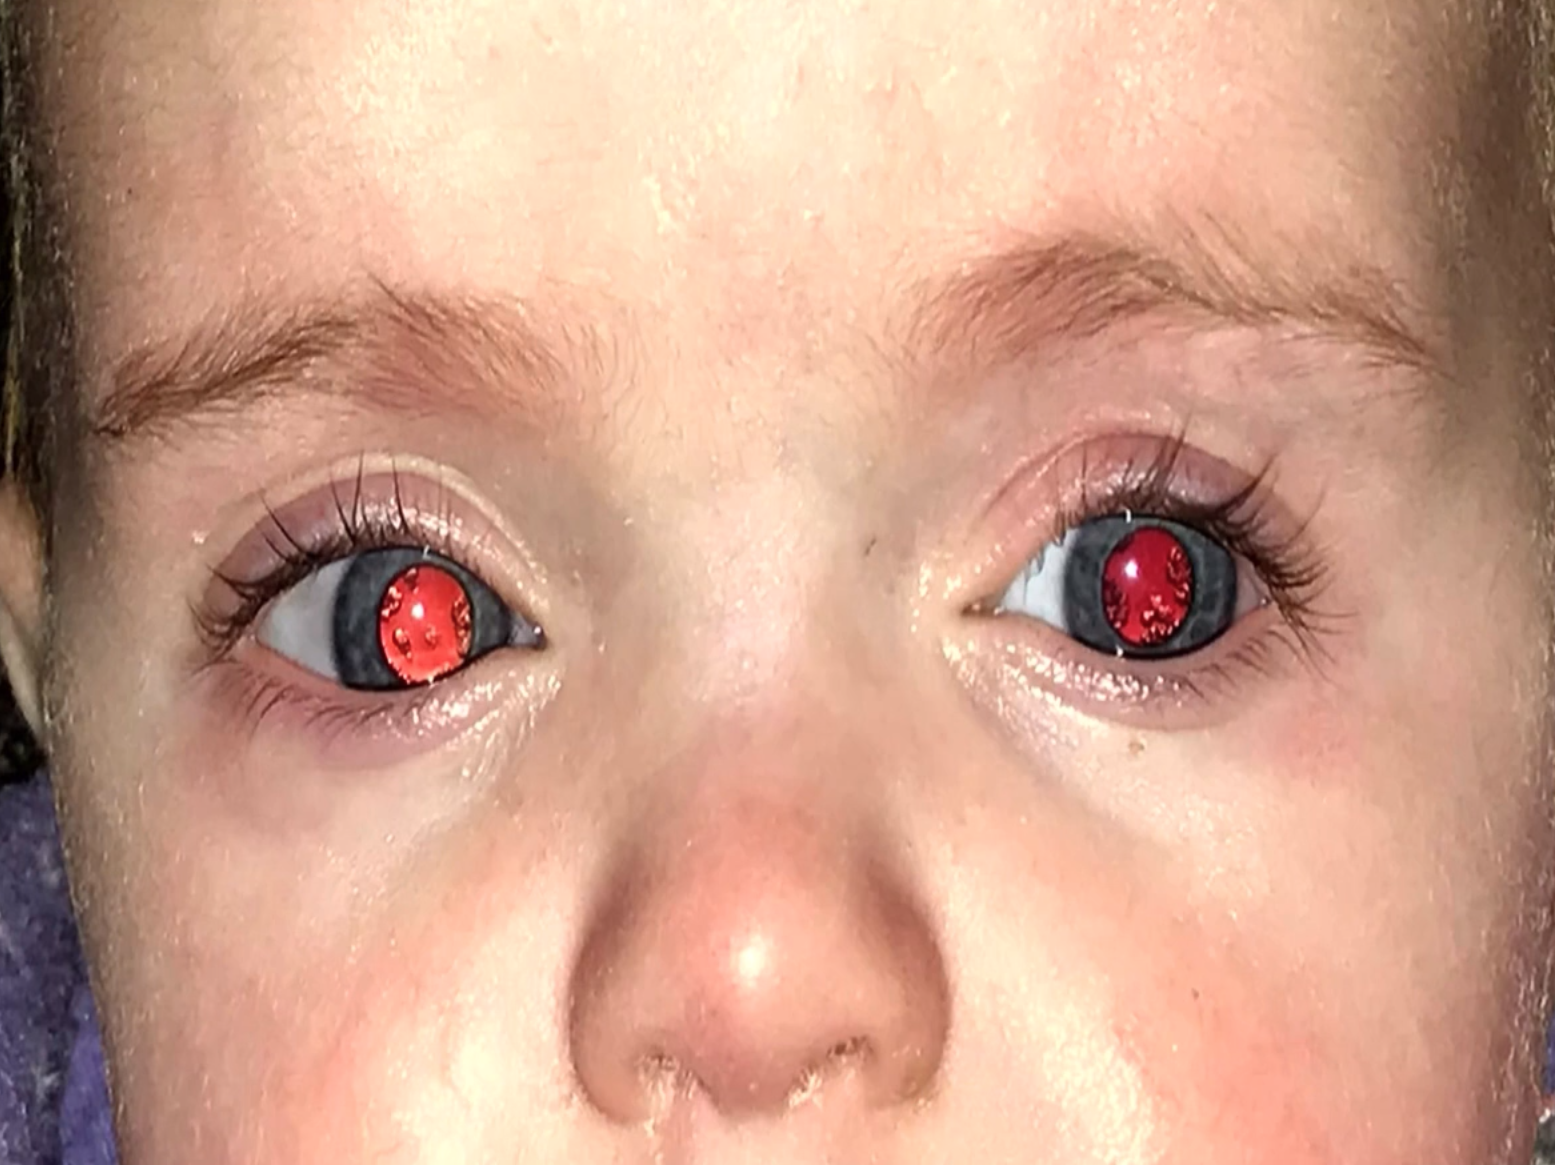 Congenital Cataracts: peripheral lenticular opacities of the type often seen in patients with galactosemia or galactokinase d